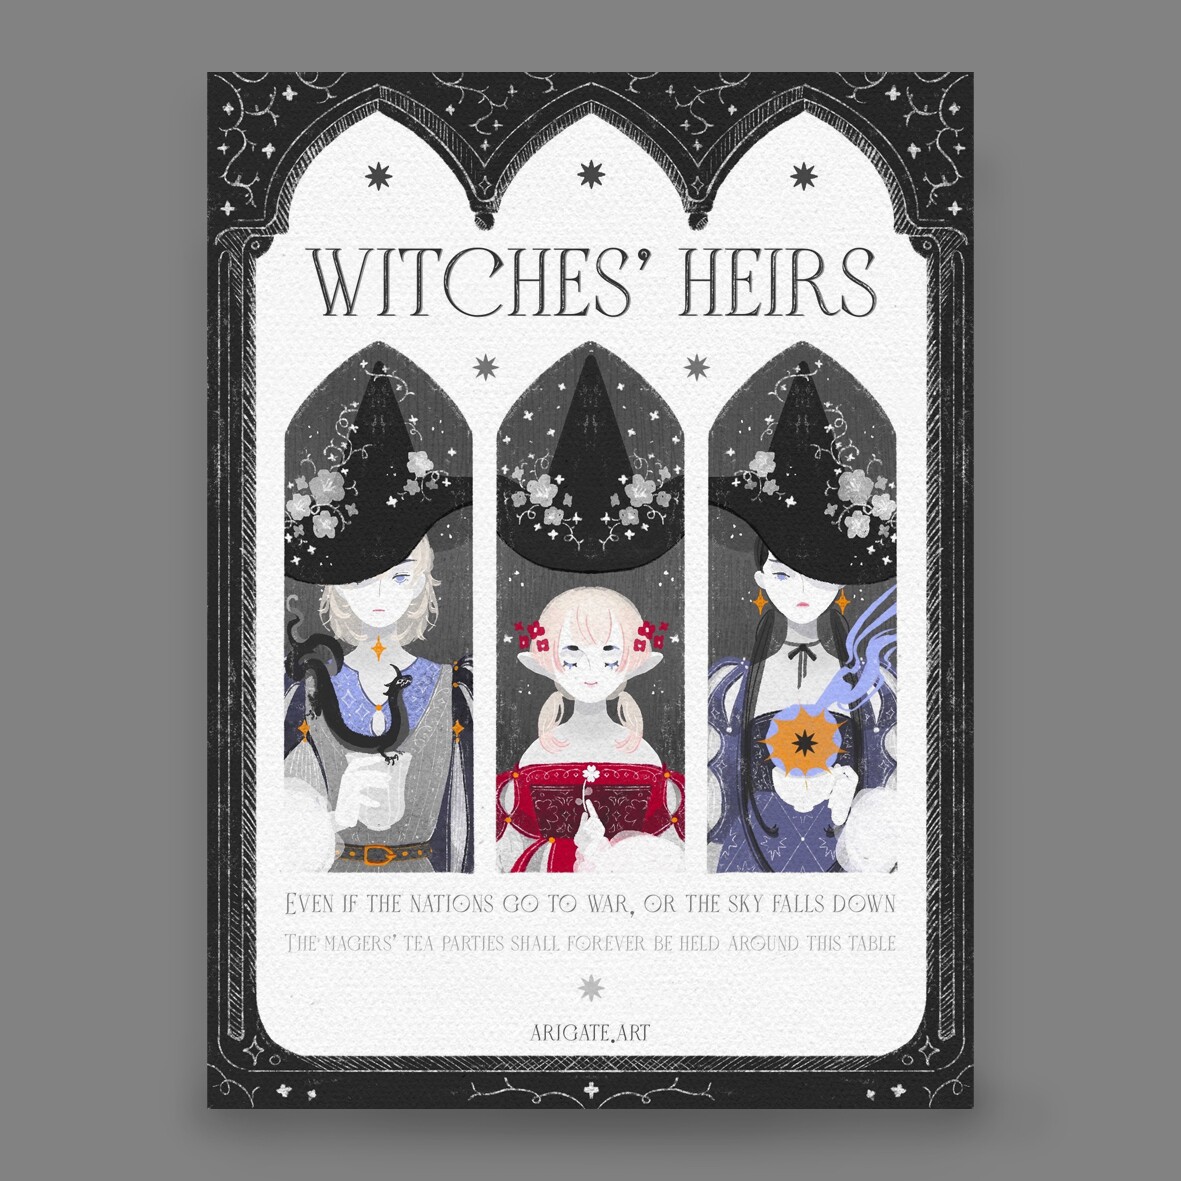 Witches' heirs